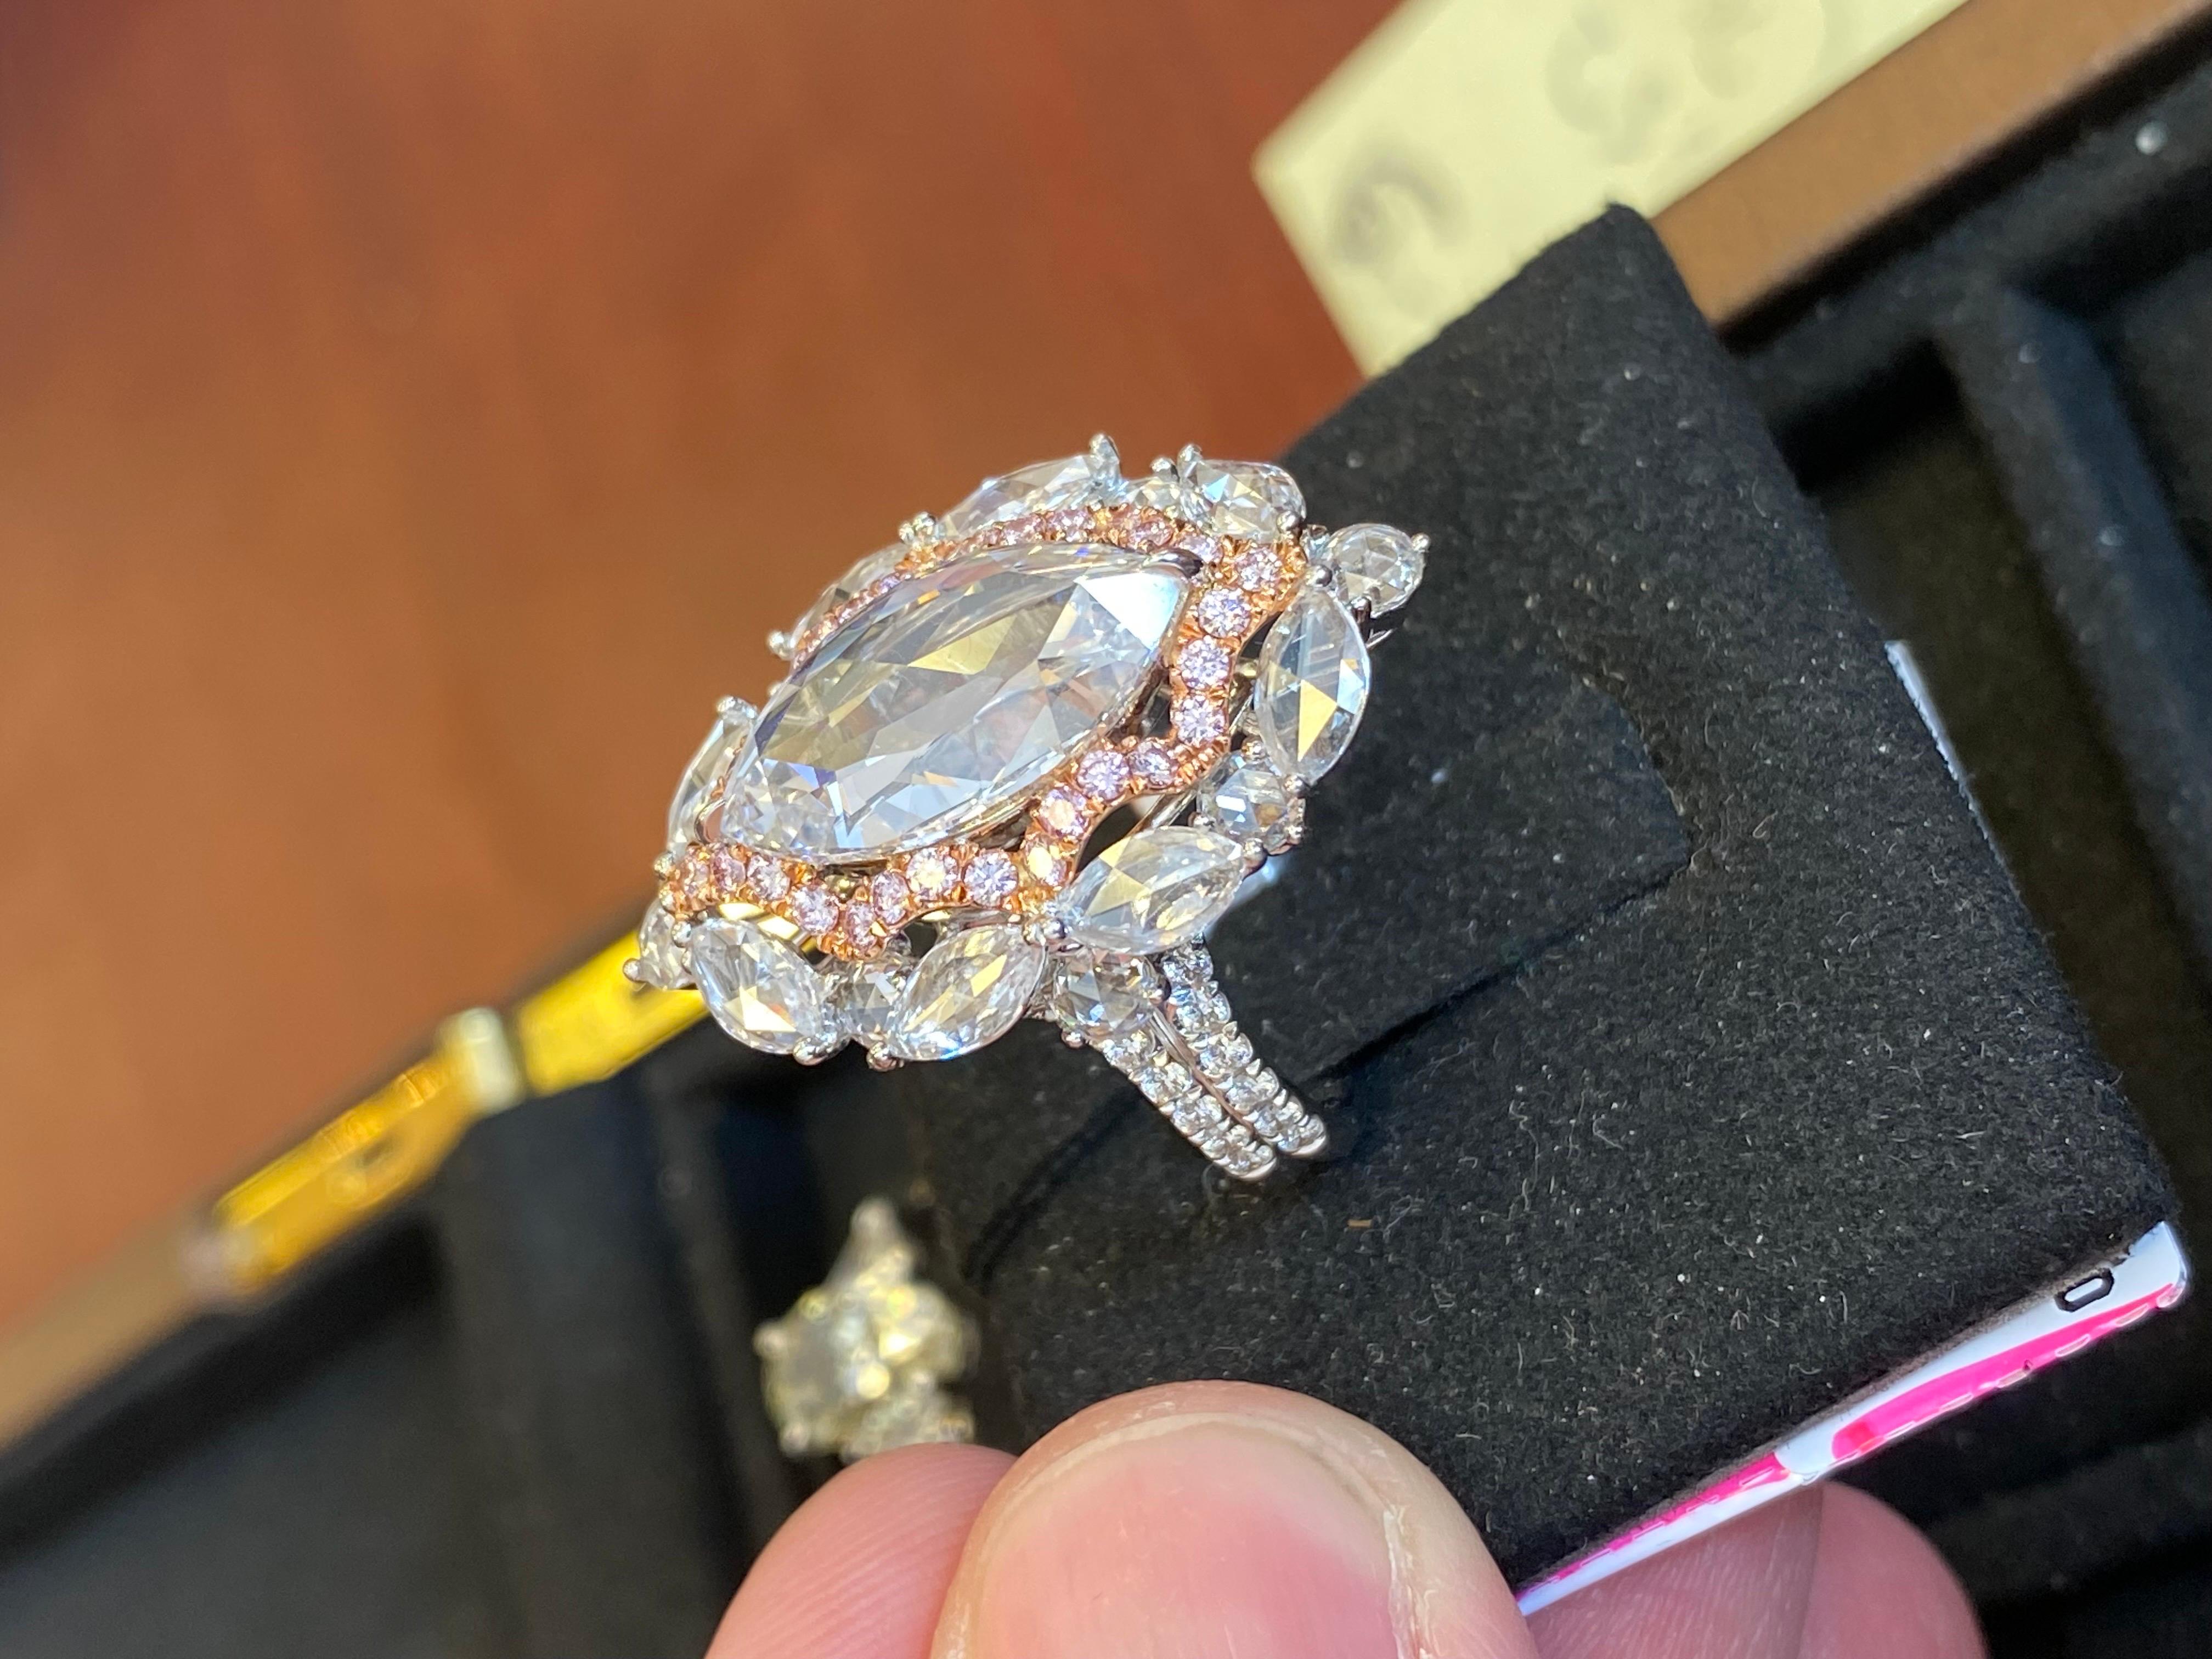 From Emilio Jewelry, a well known dealer and wholesaler located on New York's iconic Fifth Avenue,
Featuring a center unique diamond Gia Certified Rose cut Marquise, D color vvs2 clarity weighing just over 4.00 carats. The gorgeous mounting was